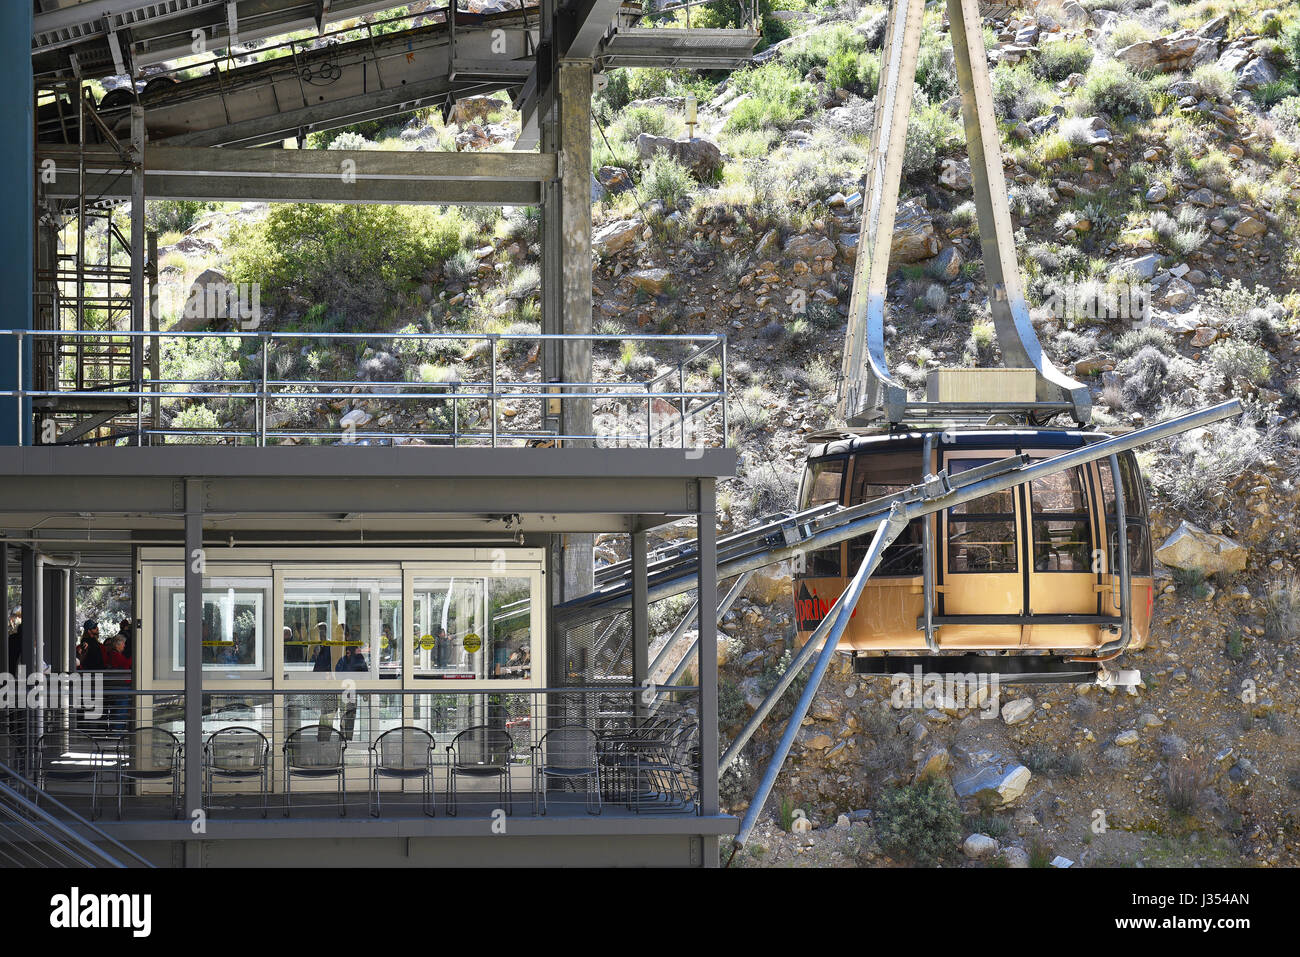 PALM SPRINGS, CALIFORNIA - MARCH 25, 2017: Palm Springs Aerial Tramway. Closeup of a tram car docking at the Valley Station. Stock Photo